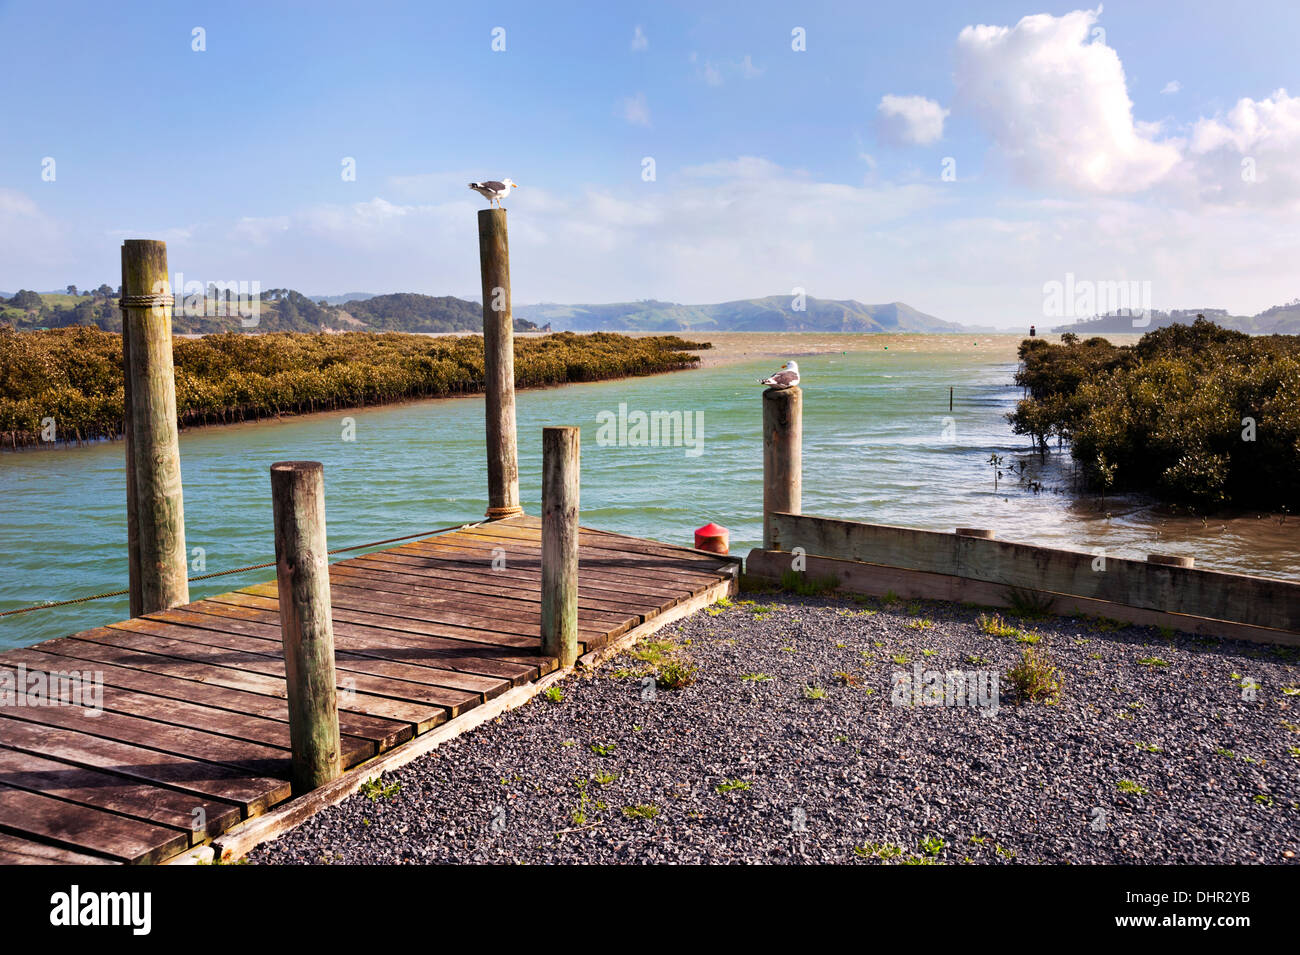 The town of Coromandel, North Island, New Zealand. Entrance to the small harbour. Stock Photo